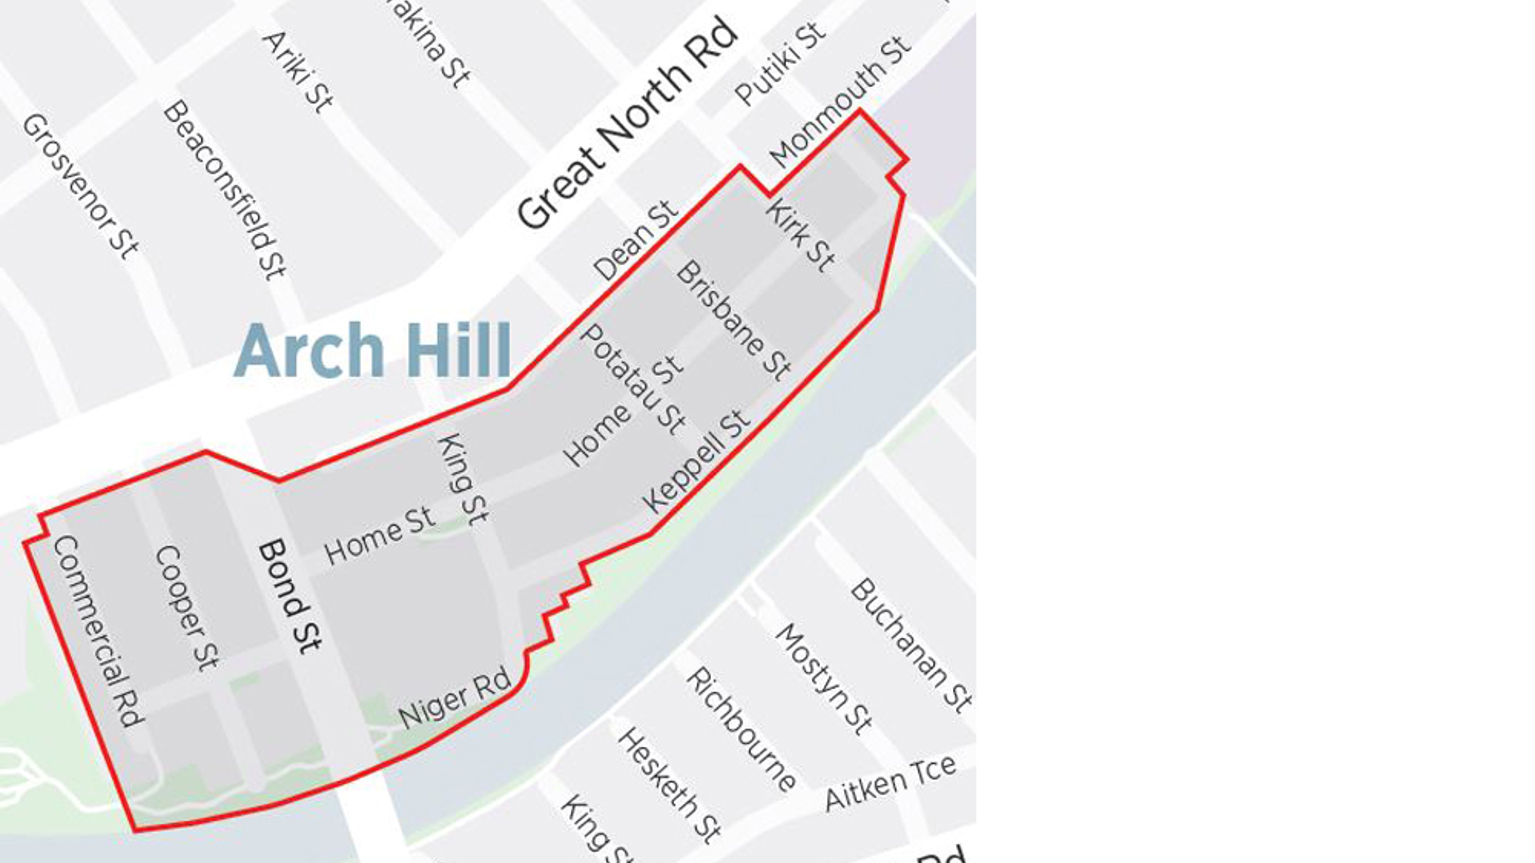 Map of Arch hill with the resident parking zone boundaries indicated with red lines.